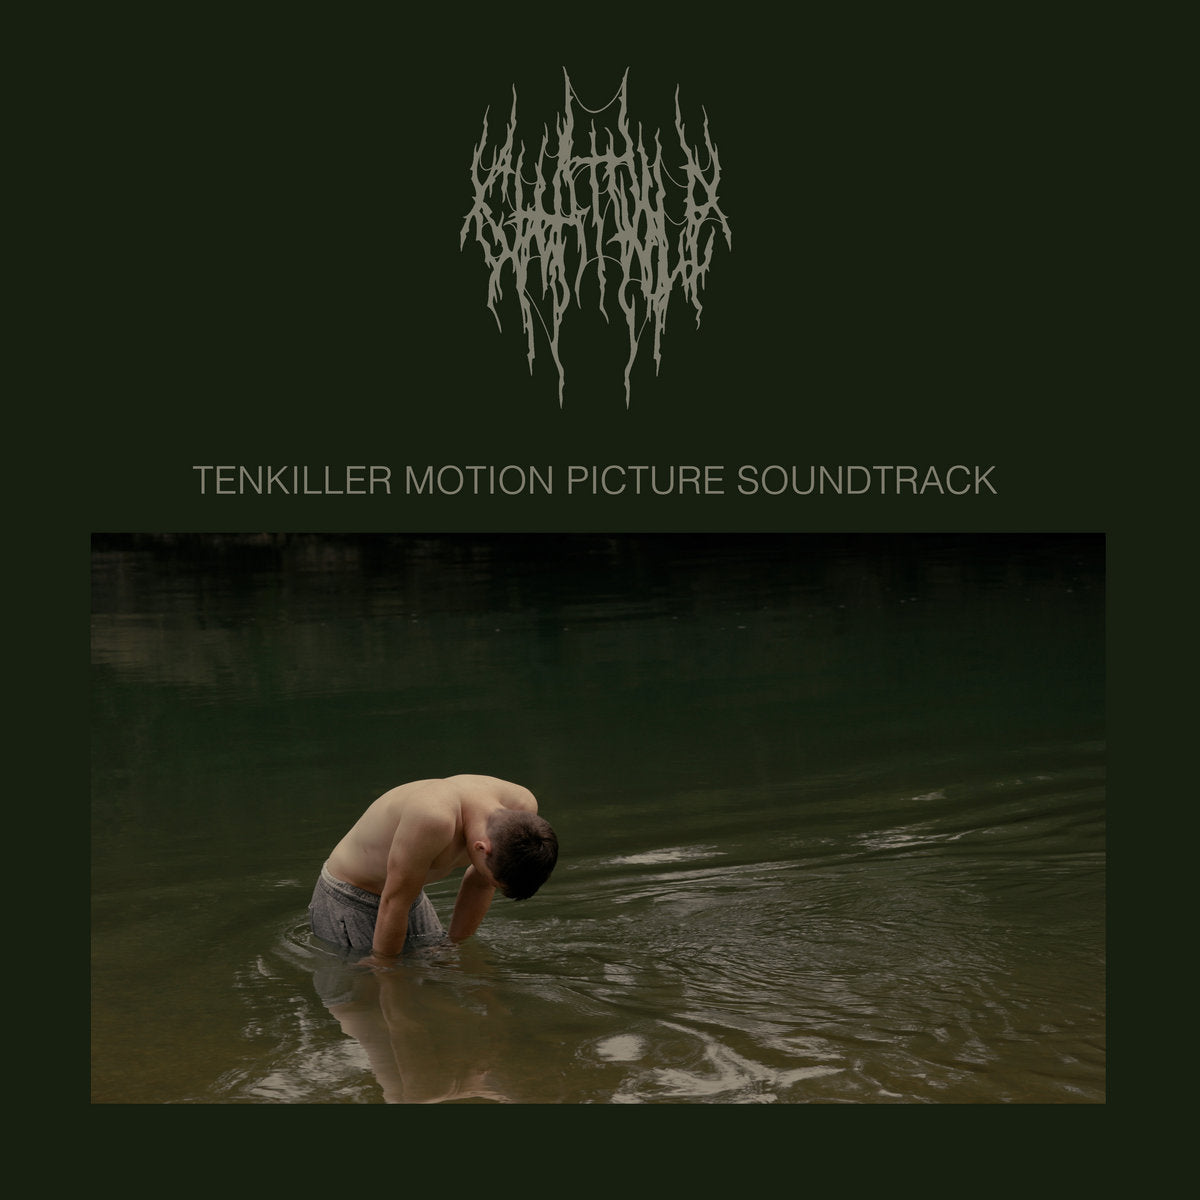 CHAT PILE "Tenkiller: Motion Picture Soundtrack" CD